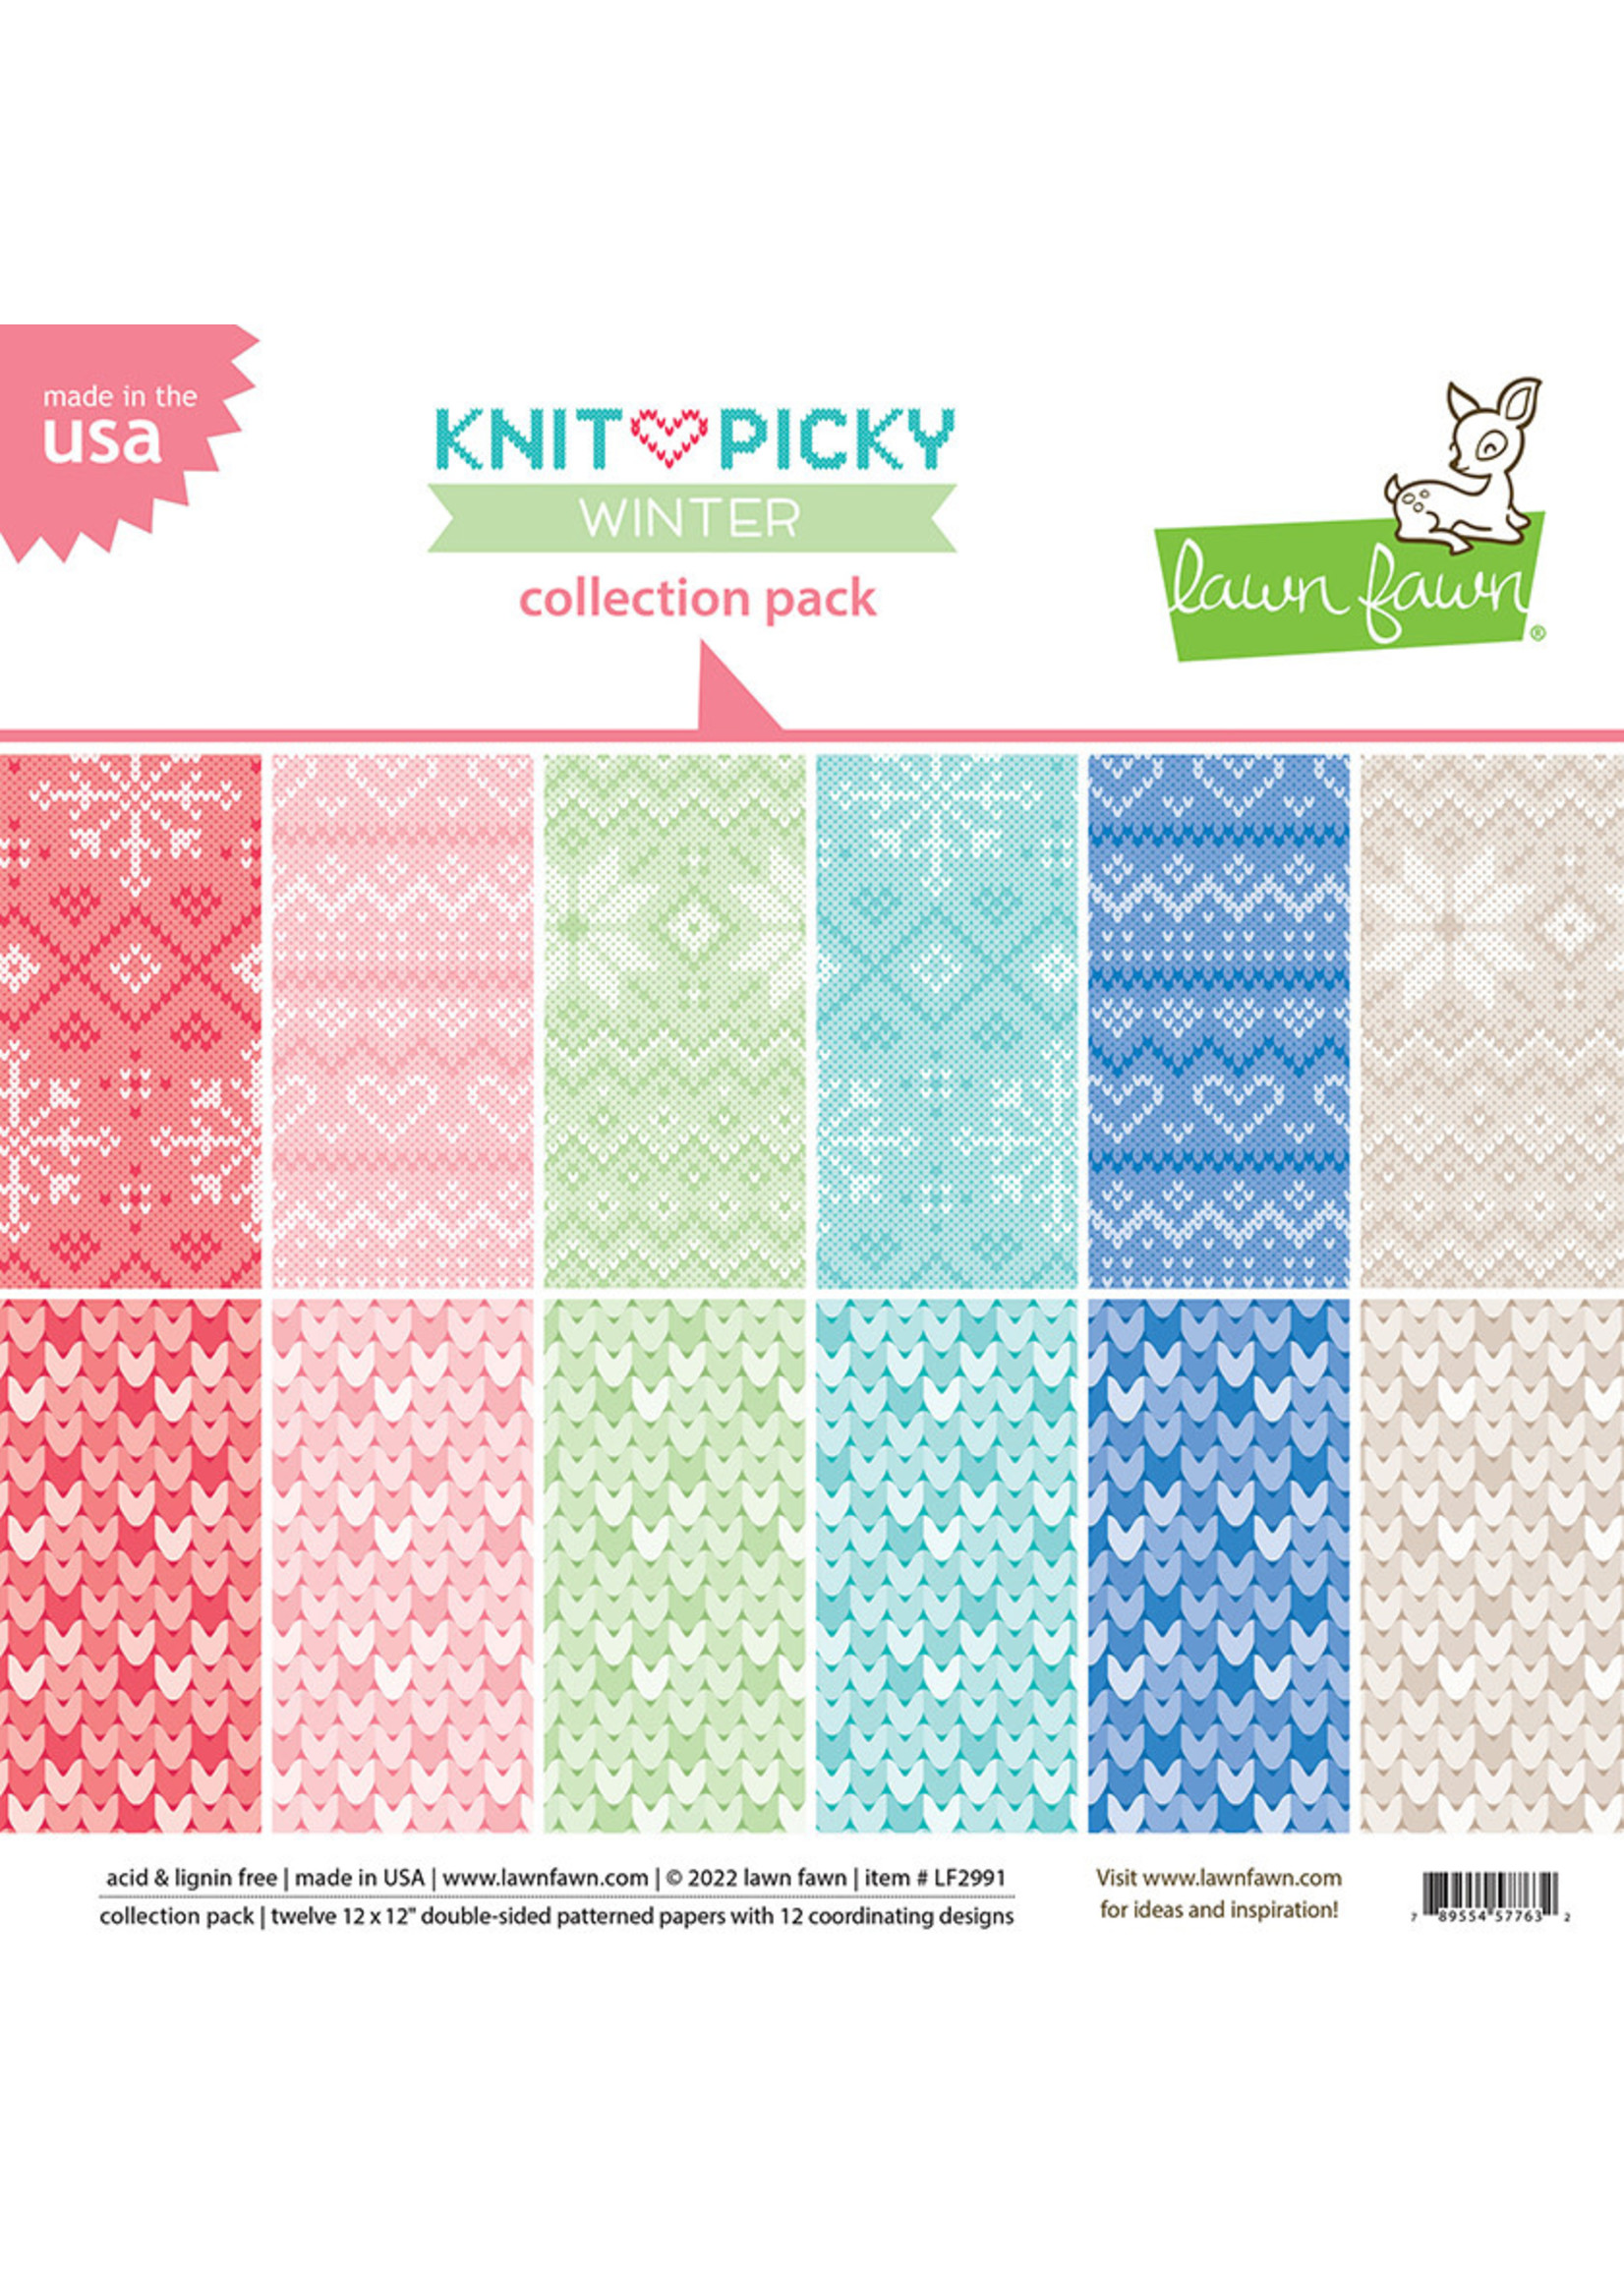 Lawn Fawn knit picky winter collection pack